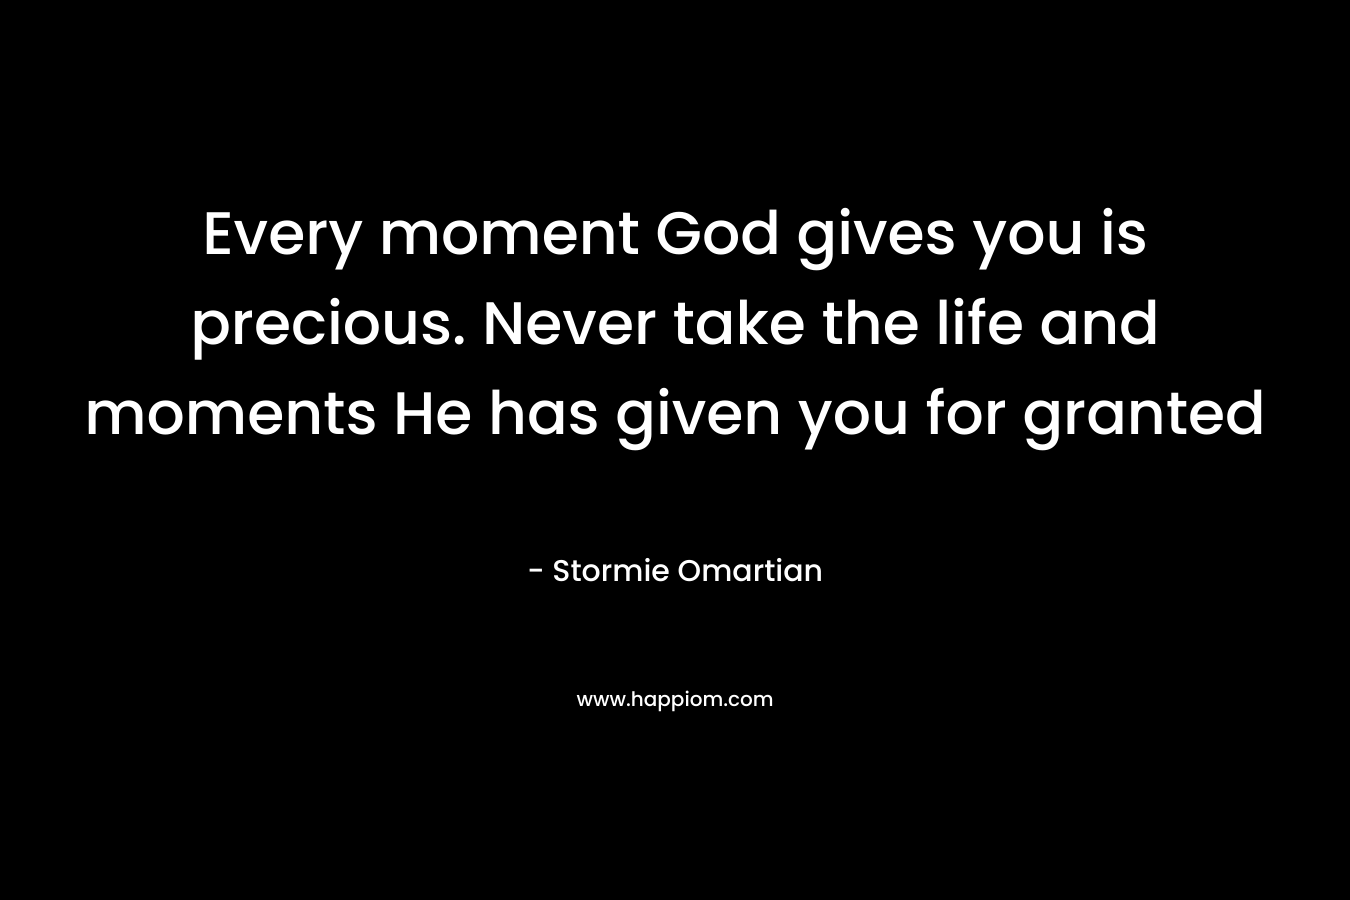 Every moment God gives you is precious. Never take the life and moments He has given you for granted